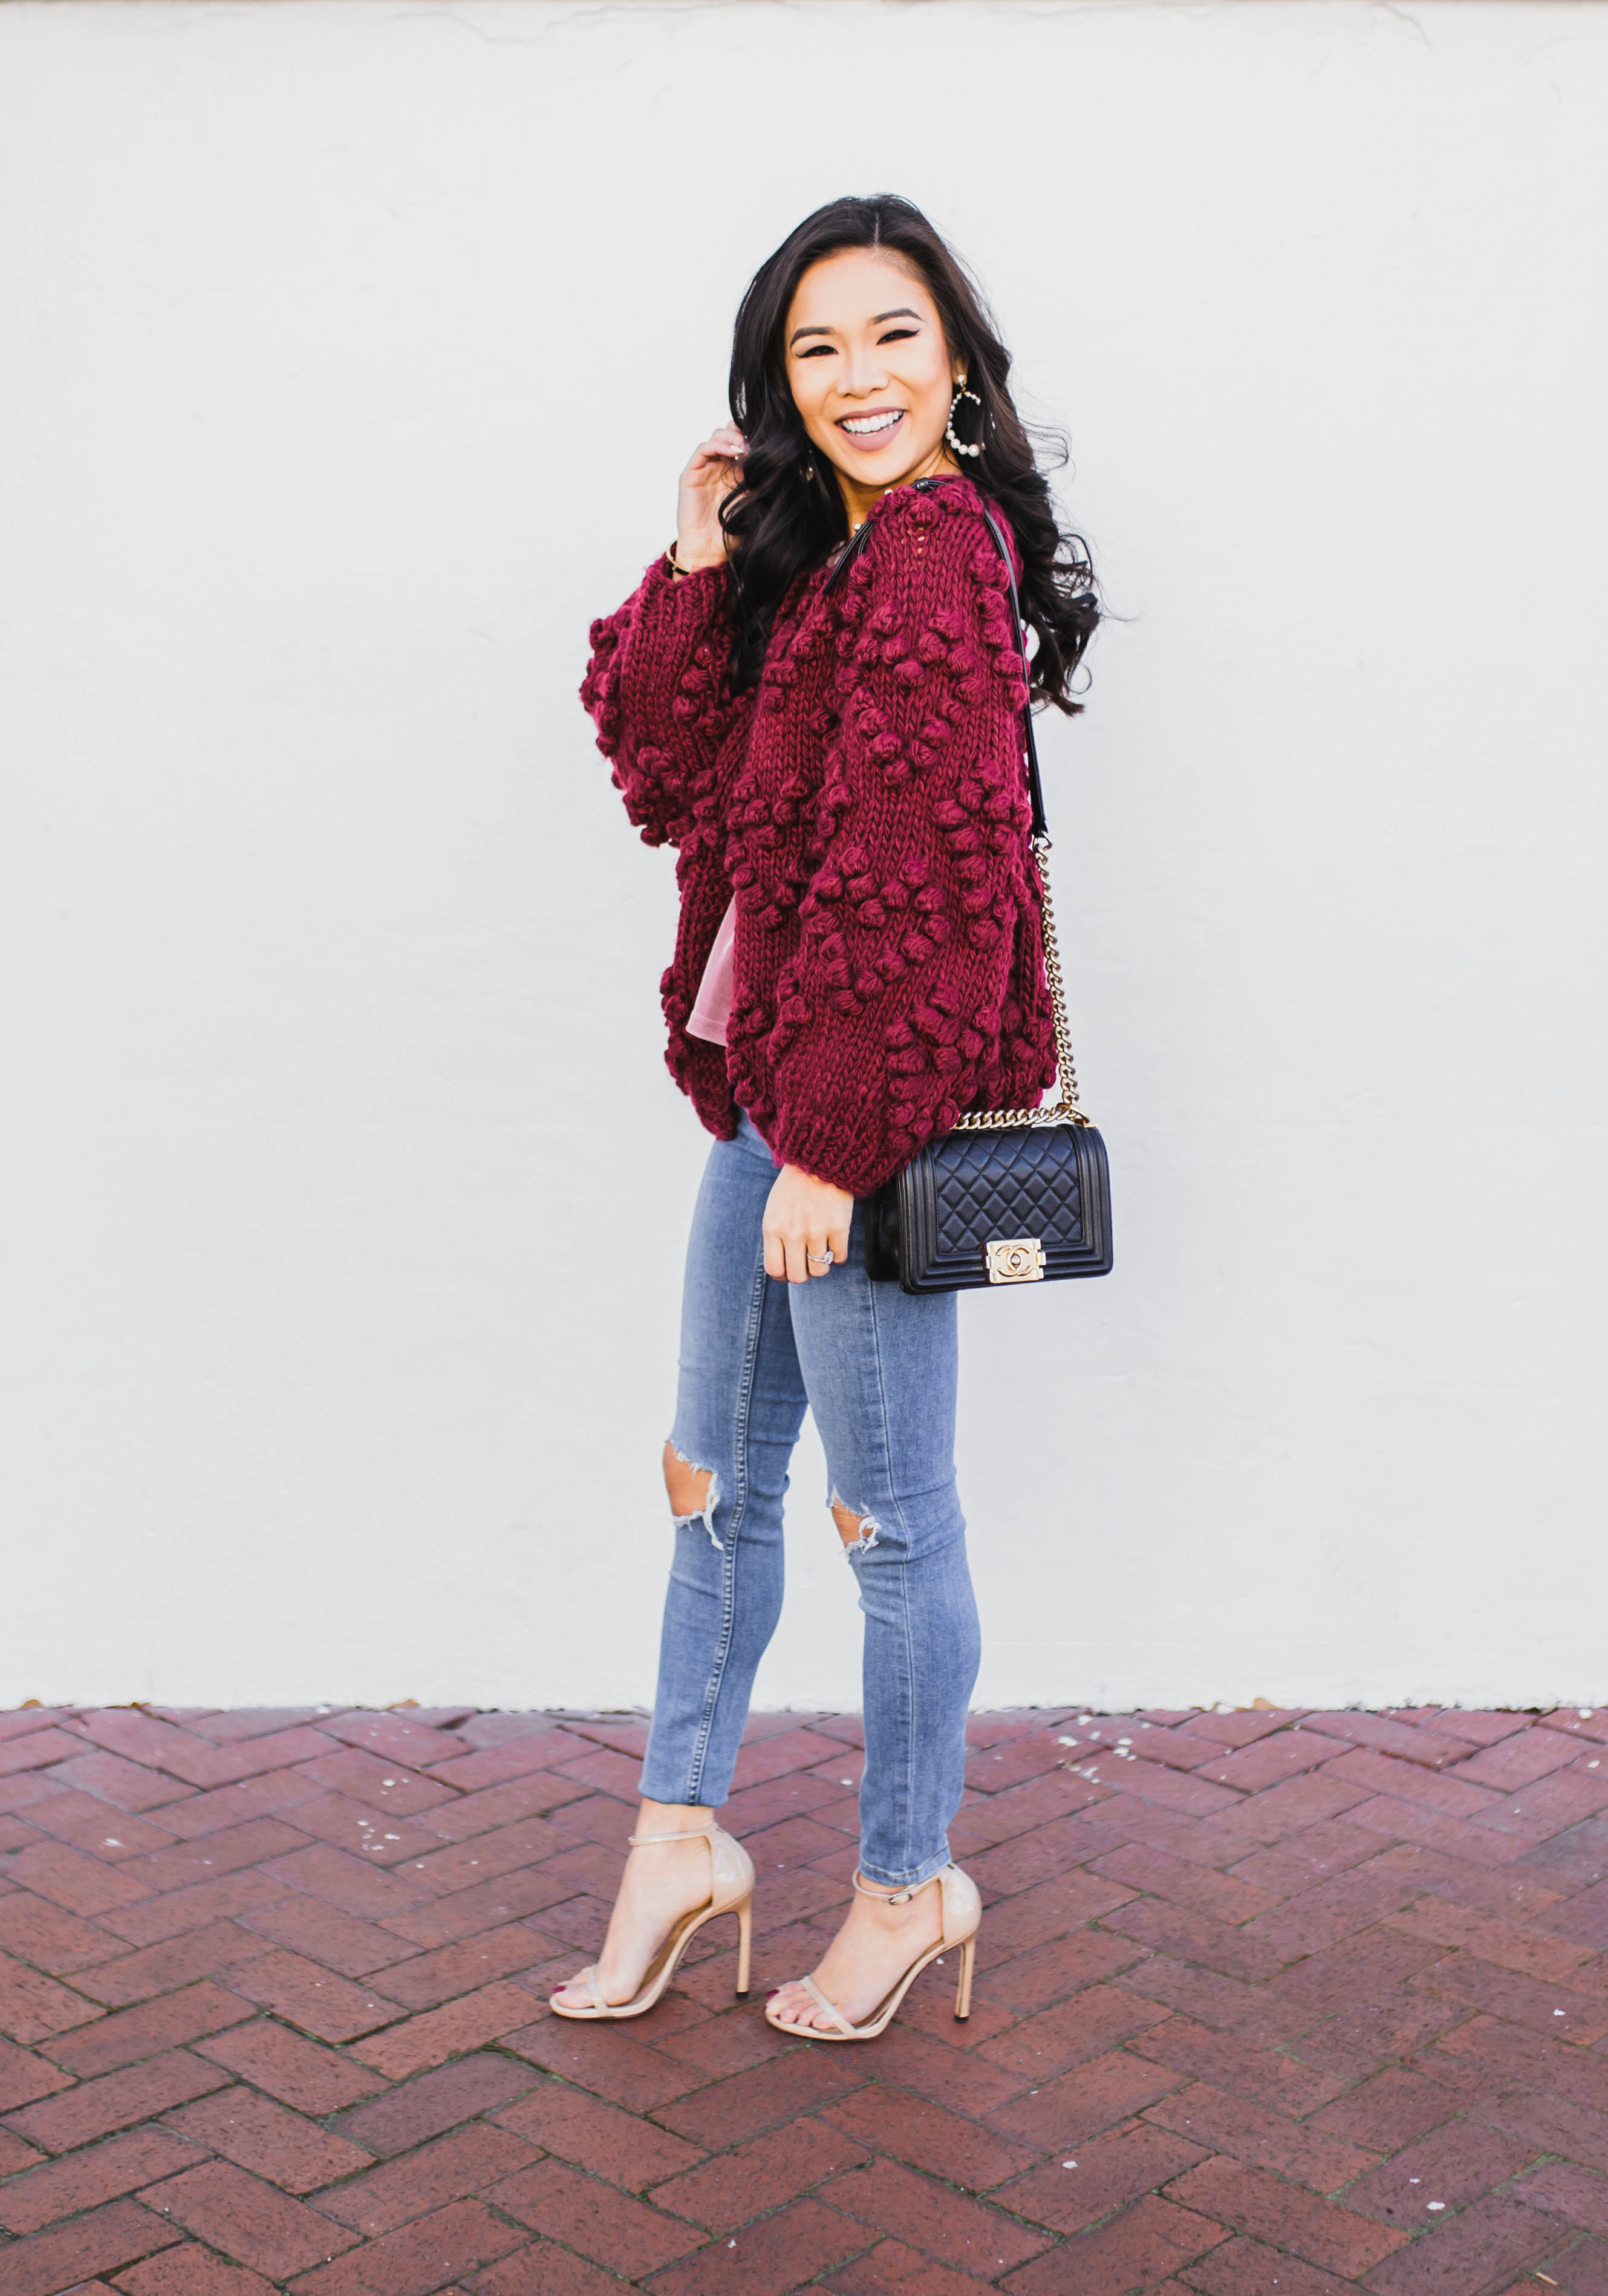 Hearts of Pom :: Knit Your Love Cardigan - Color & Chic